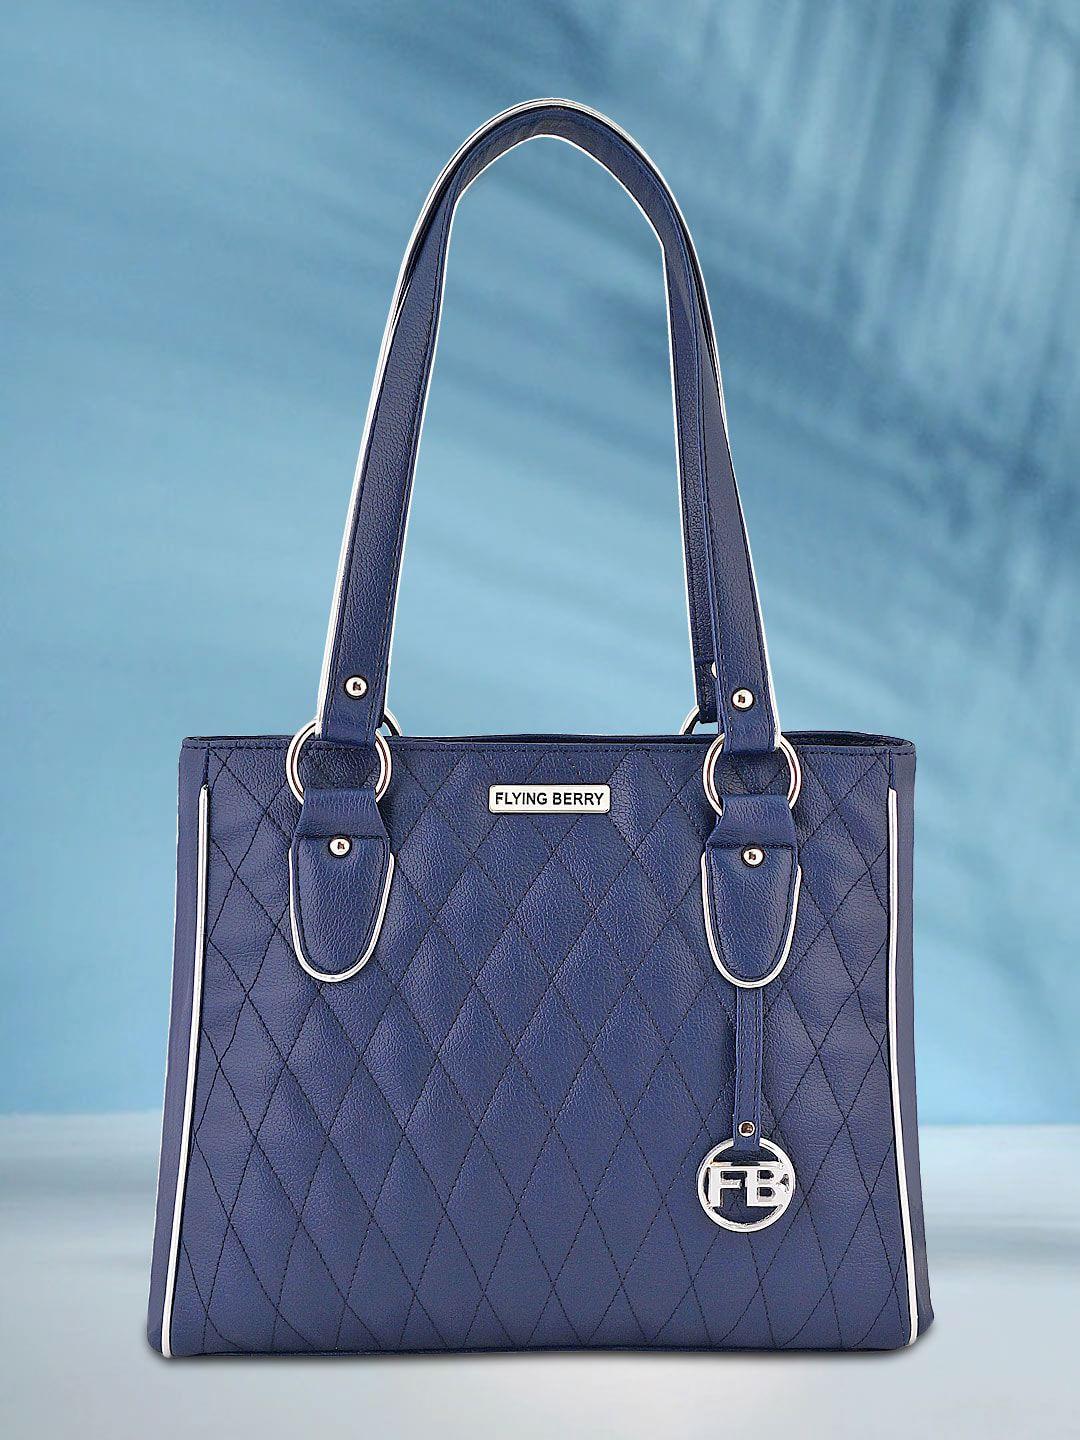 flying berry textured structured handheld bag with quilted